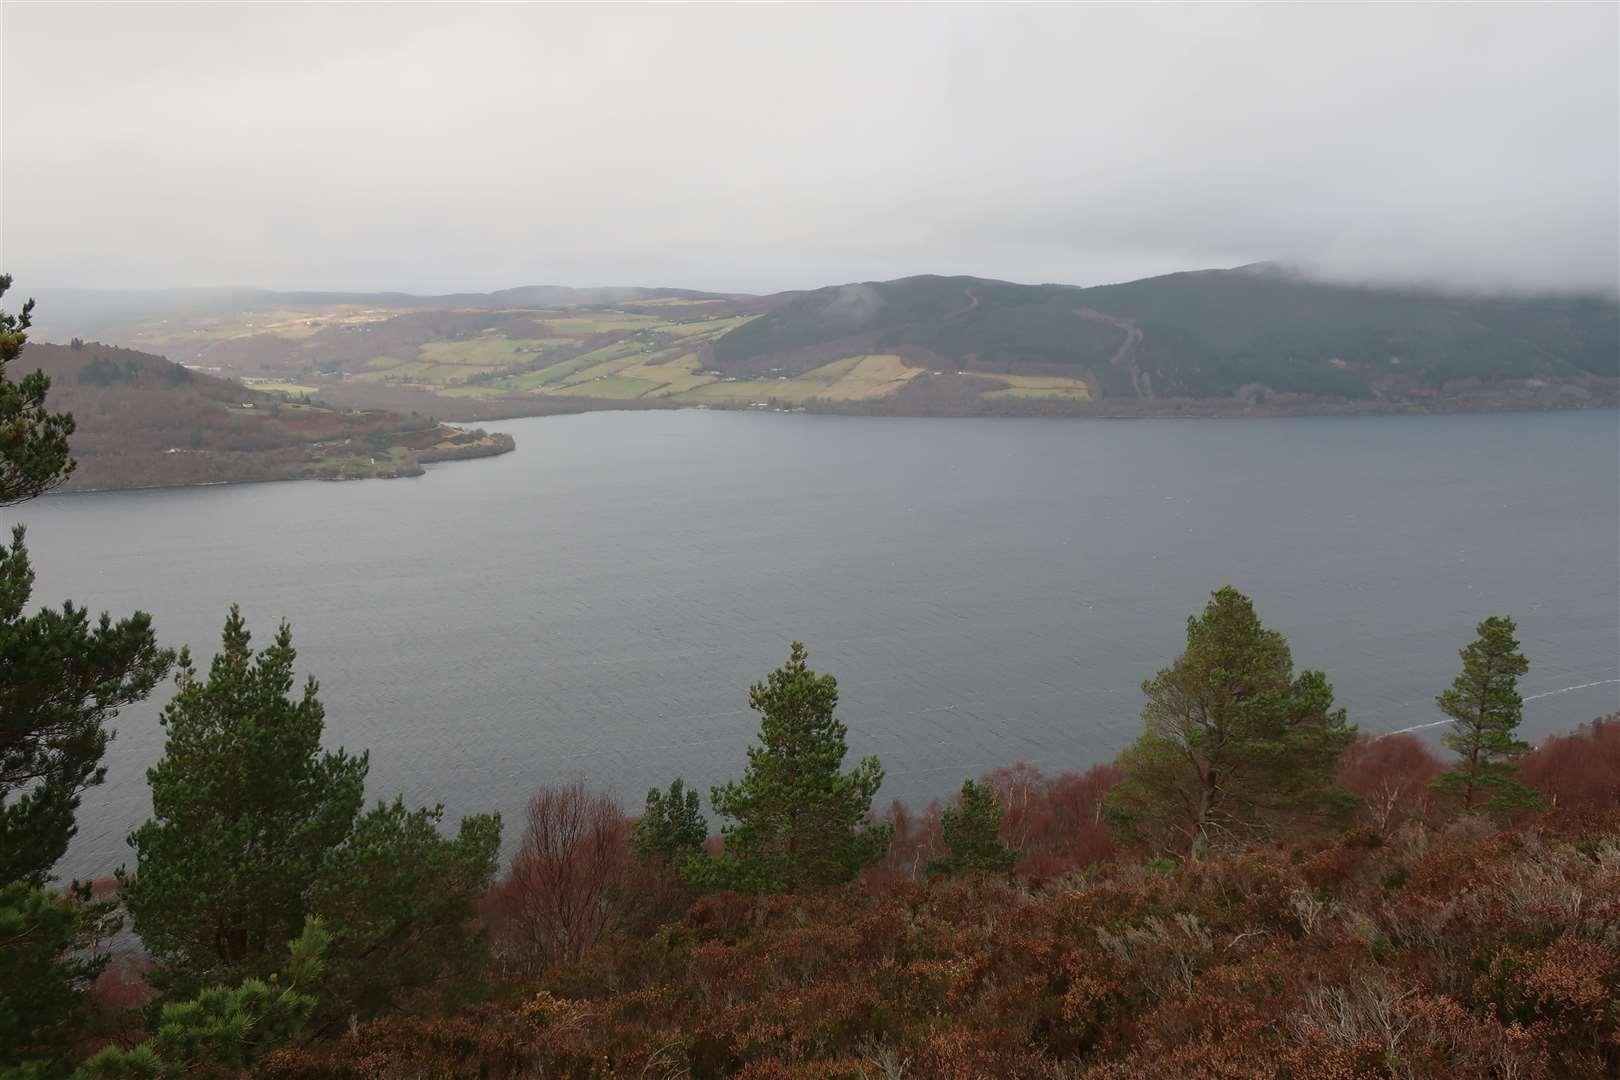 Looking across Loch Ness to Urquhart Bay from the top of the Fair Haired Lad's Pass.